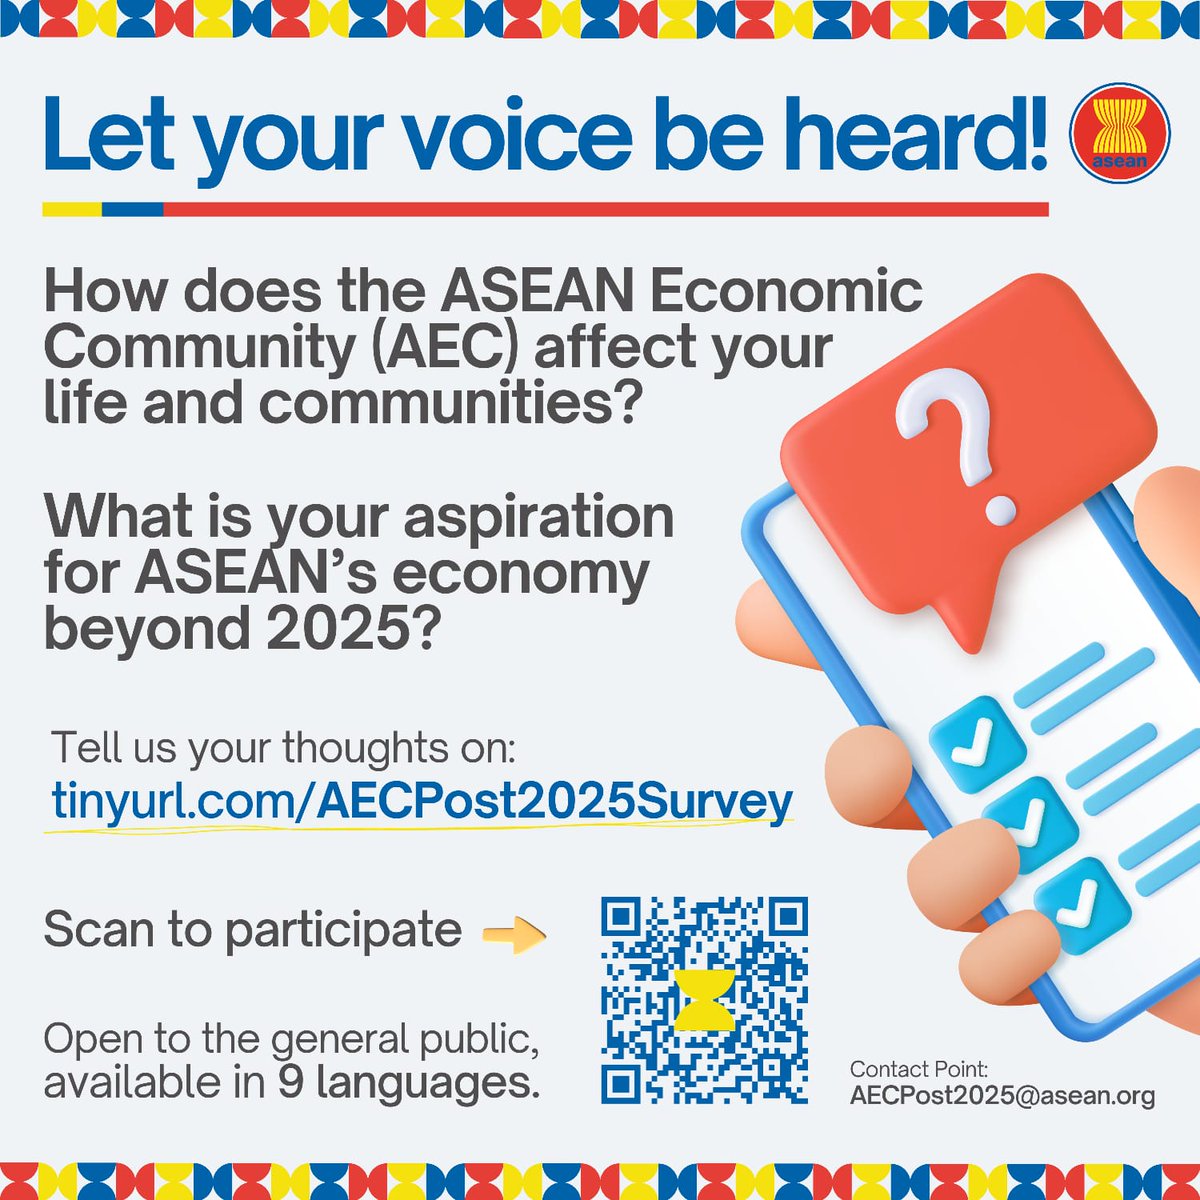 📢 Have Your Say in Shaping ASEAN's Future! ERIA in collaboration with @ASEAN has developed a survey focusing on AEC Aspects of Post-2025 Vision. Supported by @GIZIndonesia, it aims to capture the general sentiments and perspectives of ASEAN stakeholders. 📝 Head to…